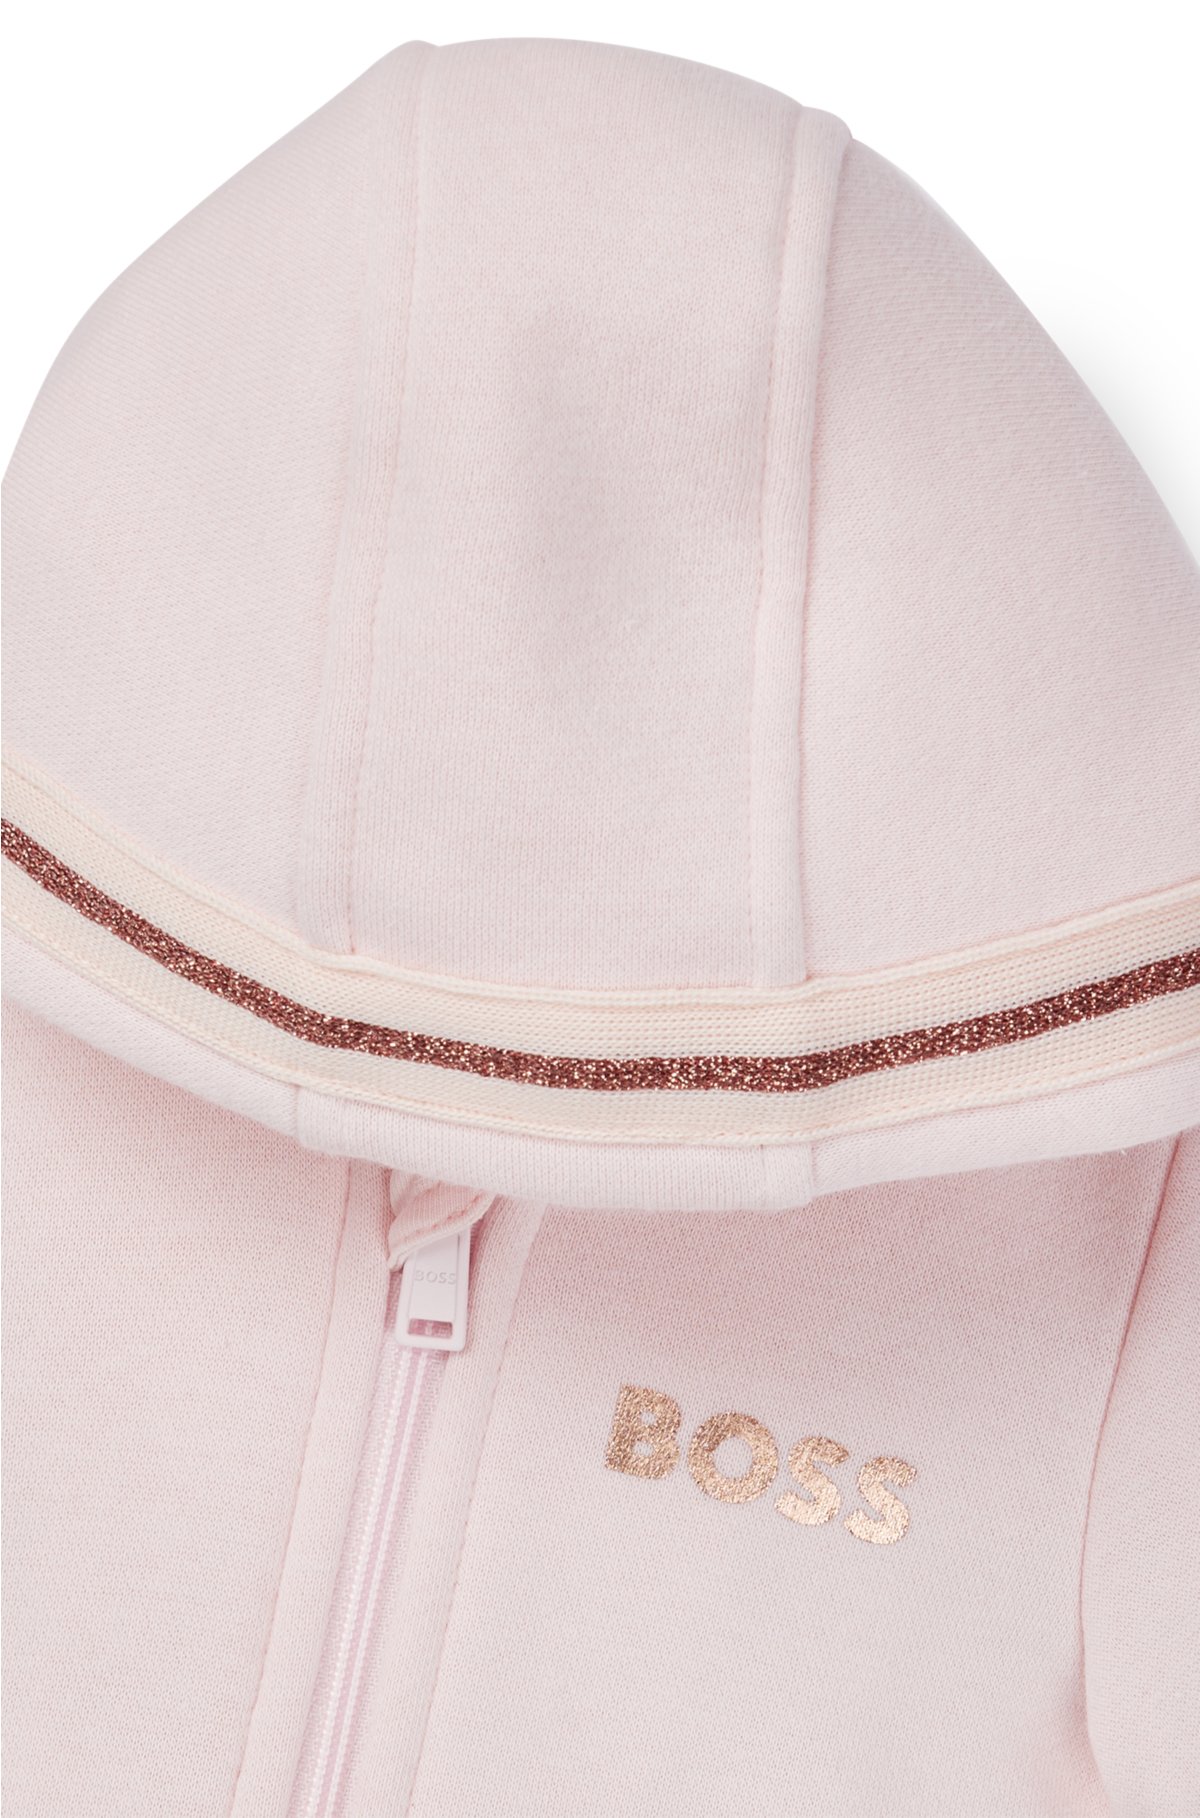 Baby cotton-blend zip-up hoodie with embroidered logo, light pink